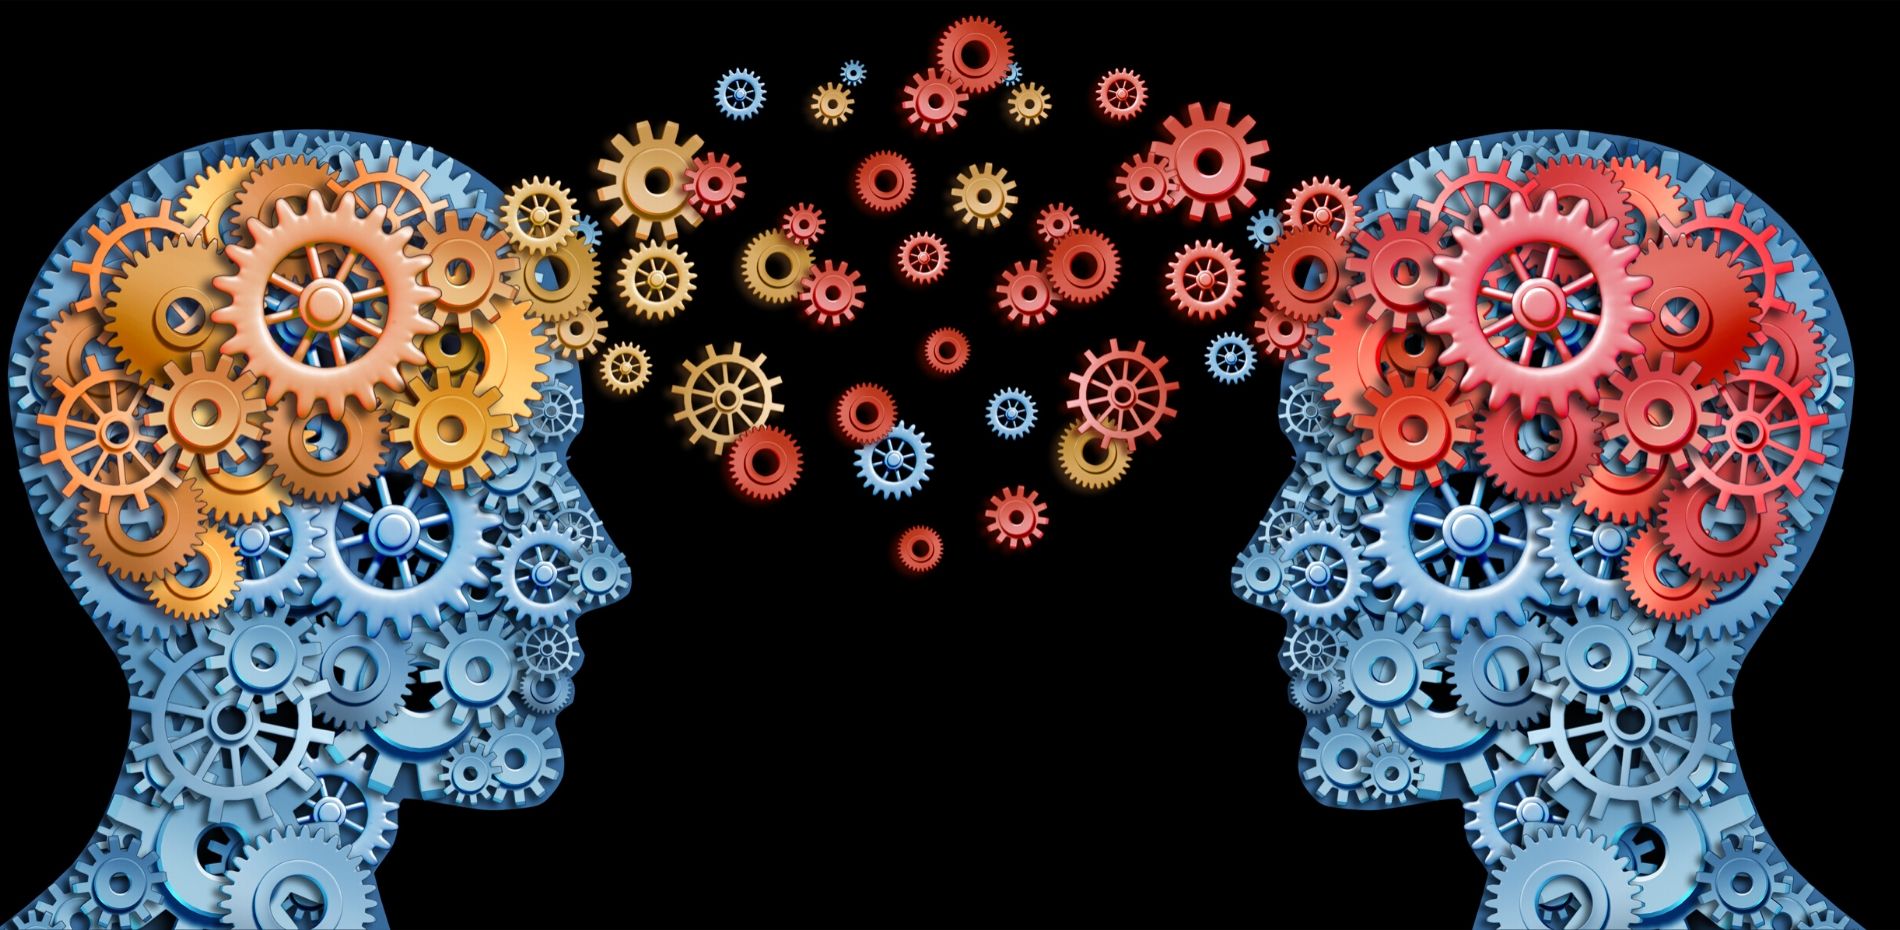 Teamwork and leadership with education symbol represented by two human heads shaped with gears with red and gold brain idea made of cogs representing the concept of intellectual communication through technology exchange.